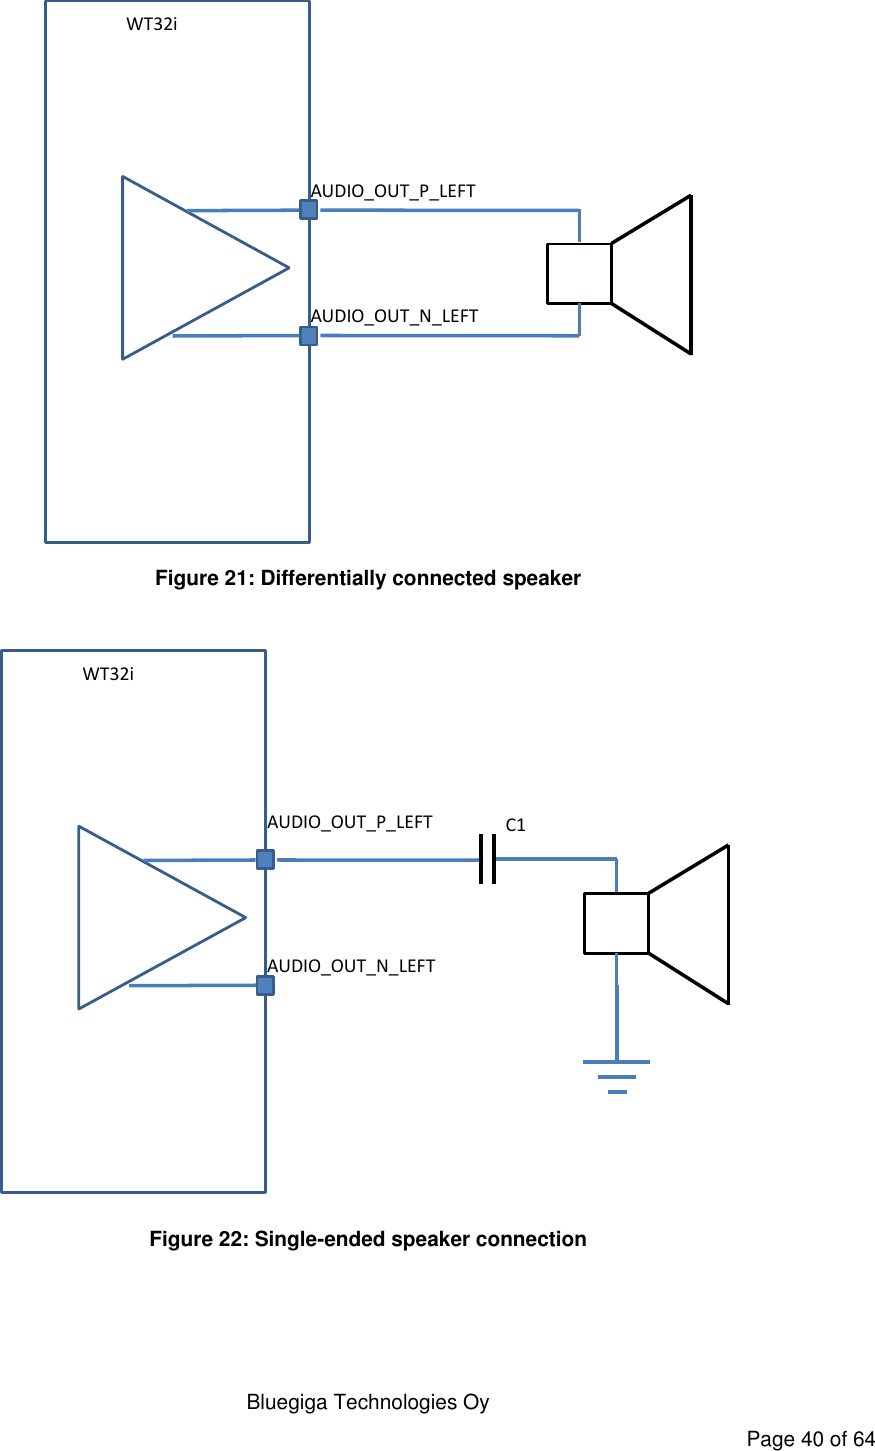   Bluegiga Technologies Oy Page 40 of 64 WT32iAUDIO_OUT_N_LEFTAUDIO_OUT_P_LEFT Figure 21: Differentially connected speaker  WT32iAUDIO_OUT_N_LEFTAUDIO_OUT_P_LEFT C1 Figure 22: Single-ended speaker connection  